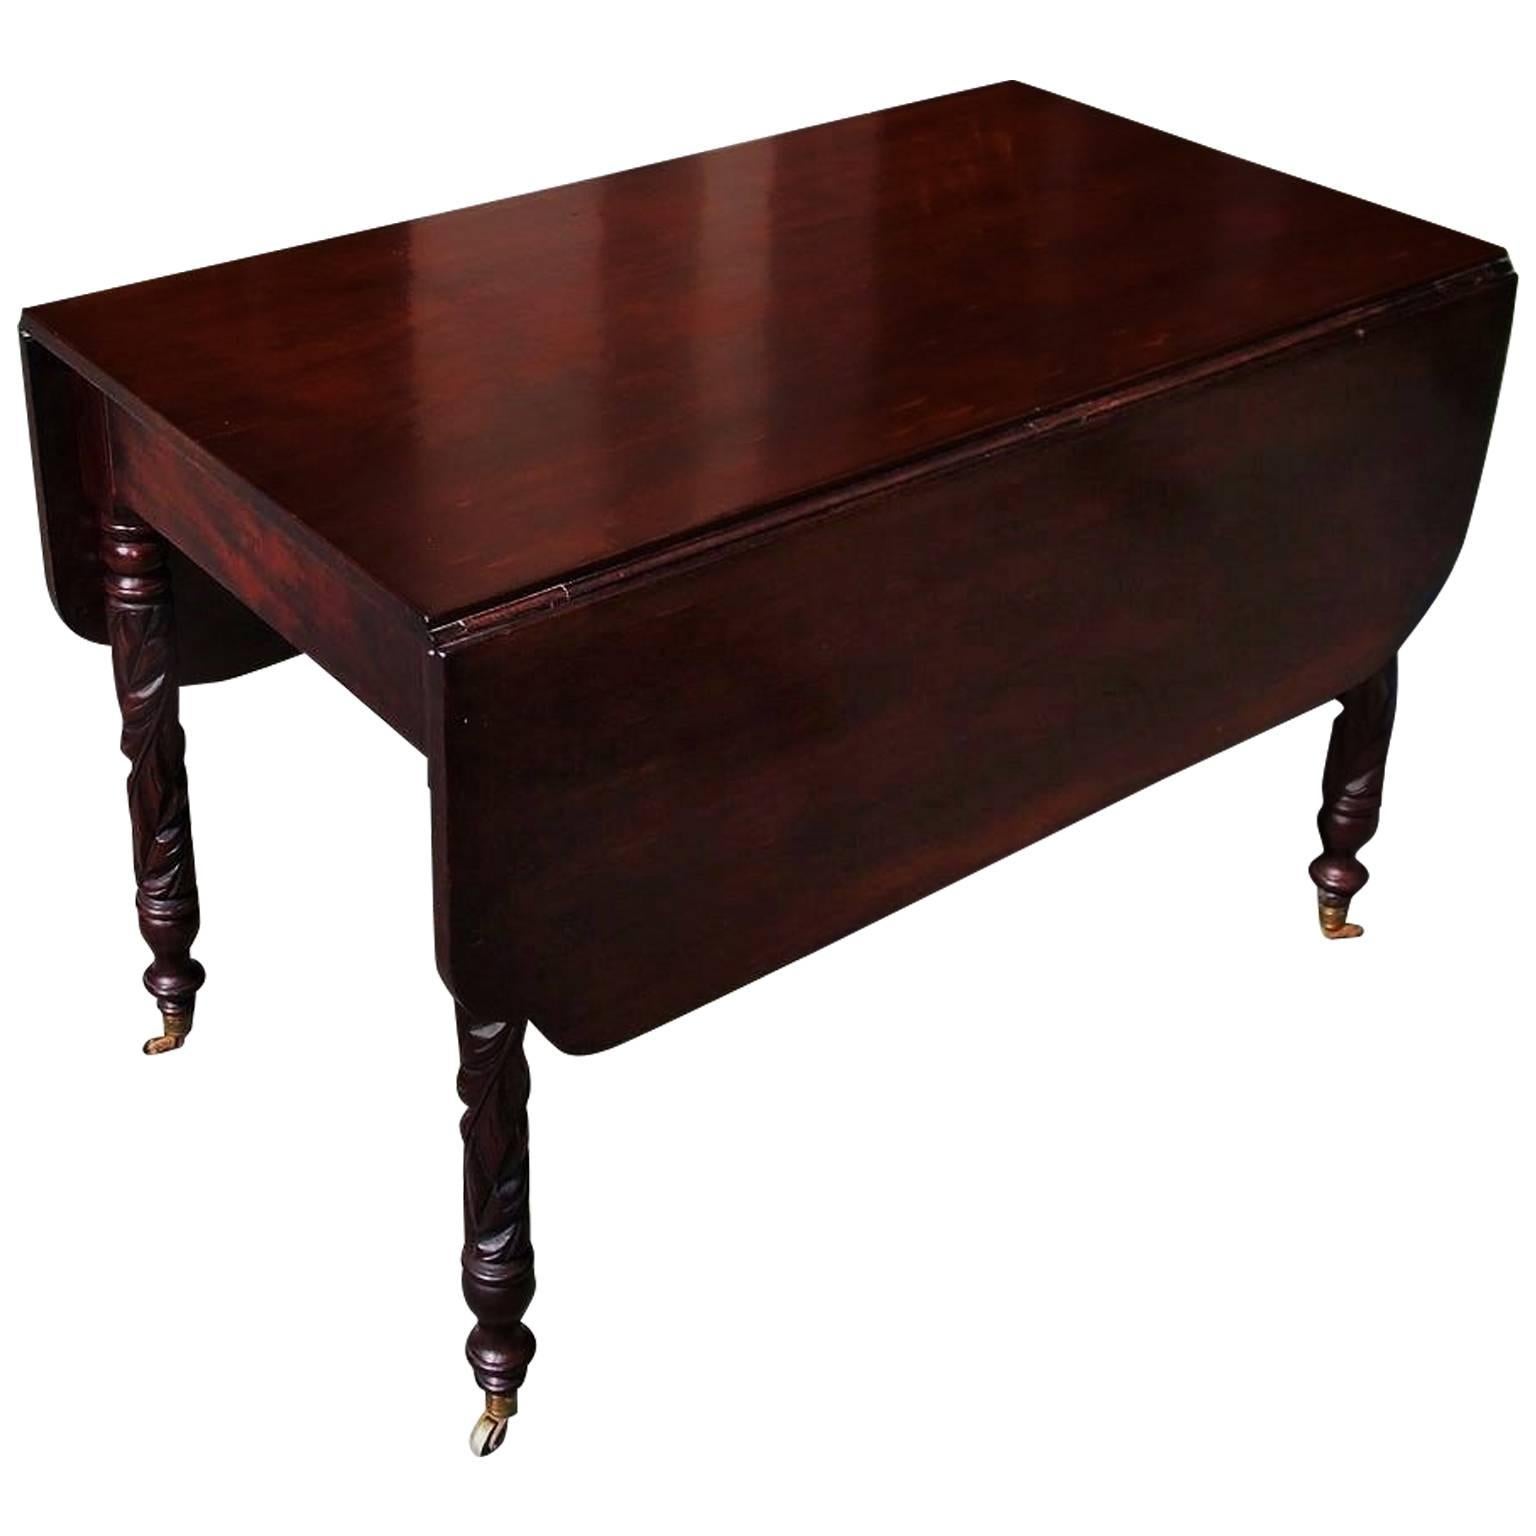 American Sheraton Cherry Acanthus Carved Drop-Leaf Table on Casters, Circa 1820 For Sale